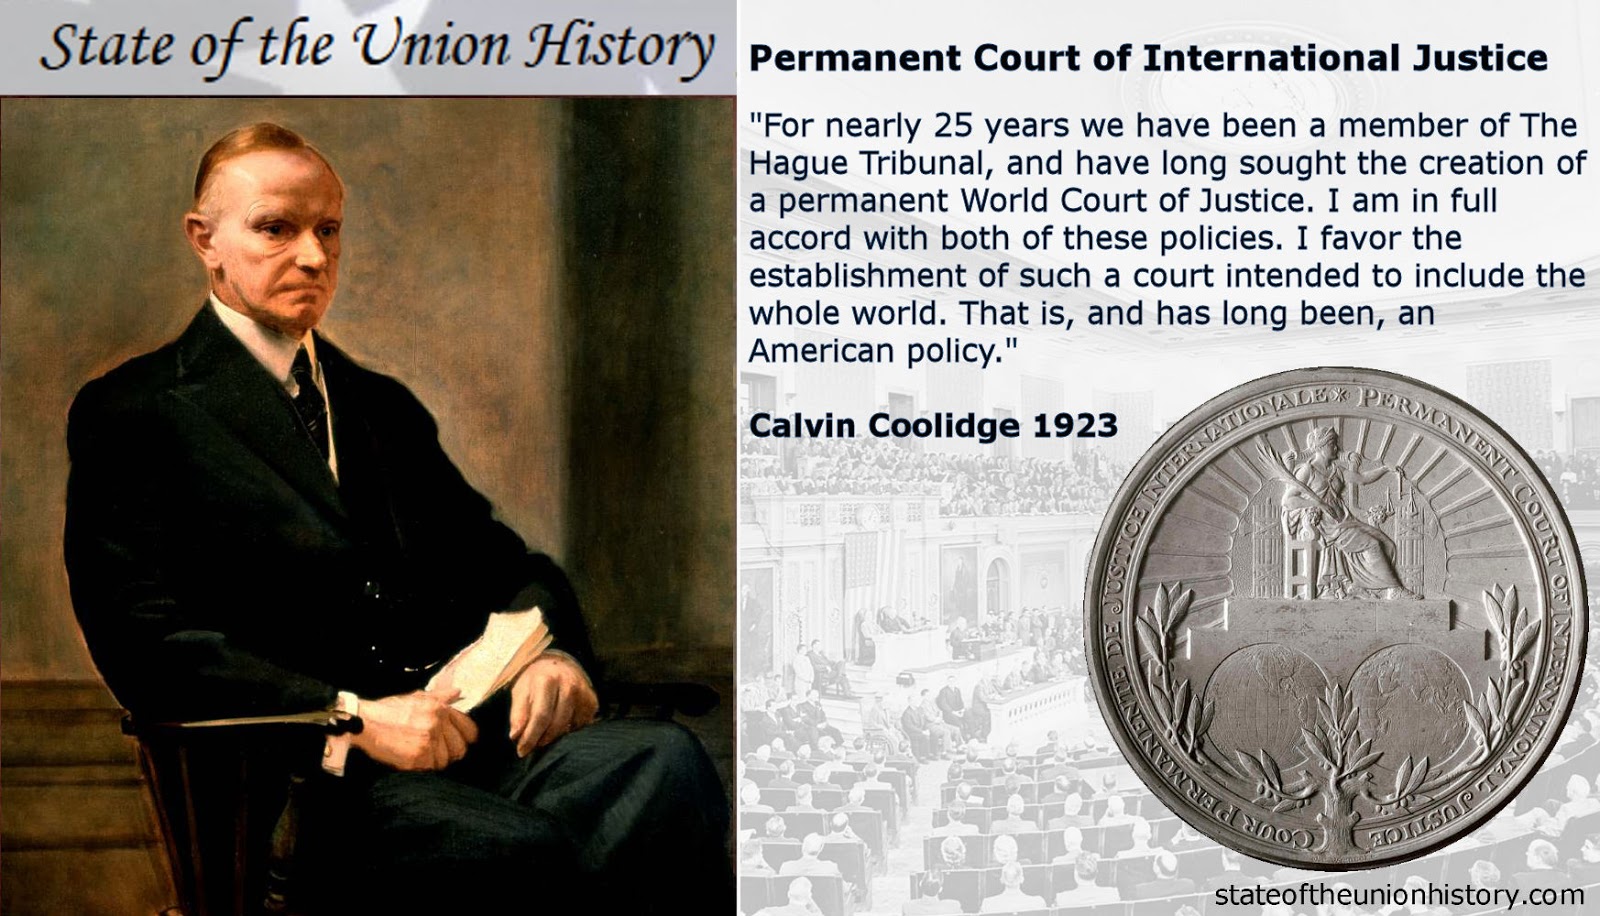 1923 Calvin Coolidge - Permanent Court of International Justice | State of the Union History